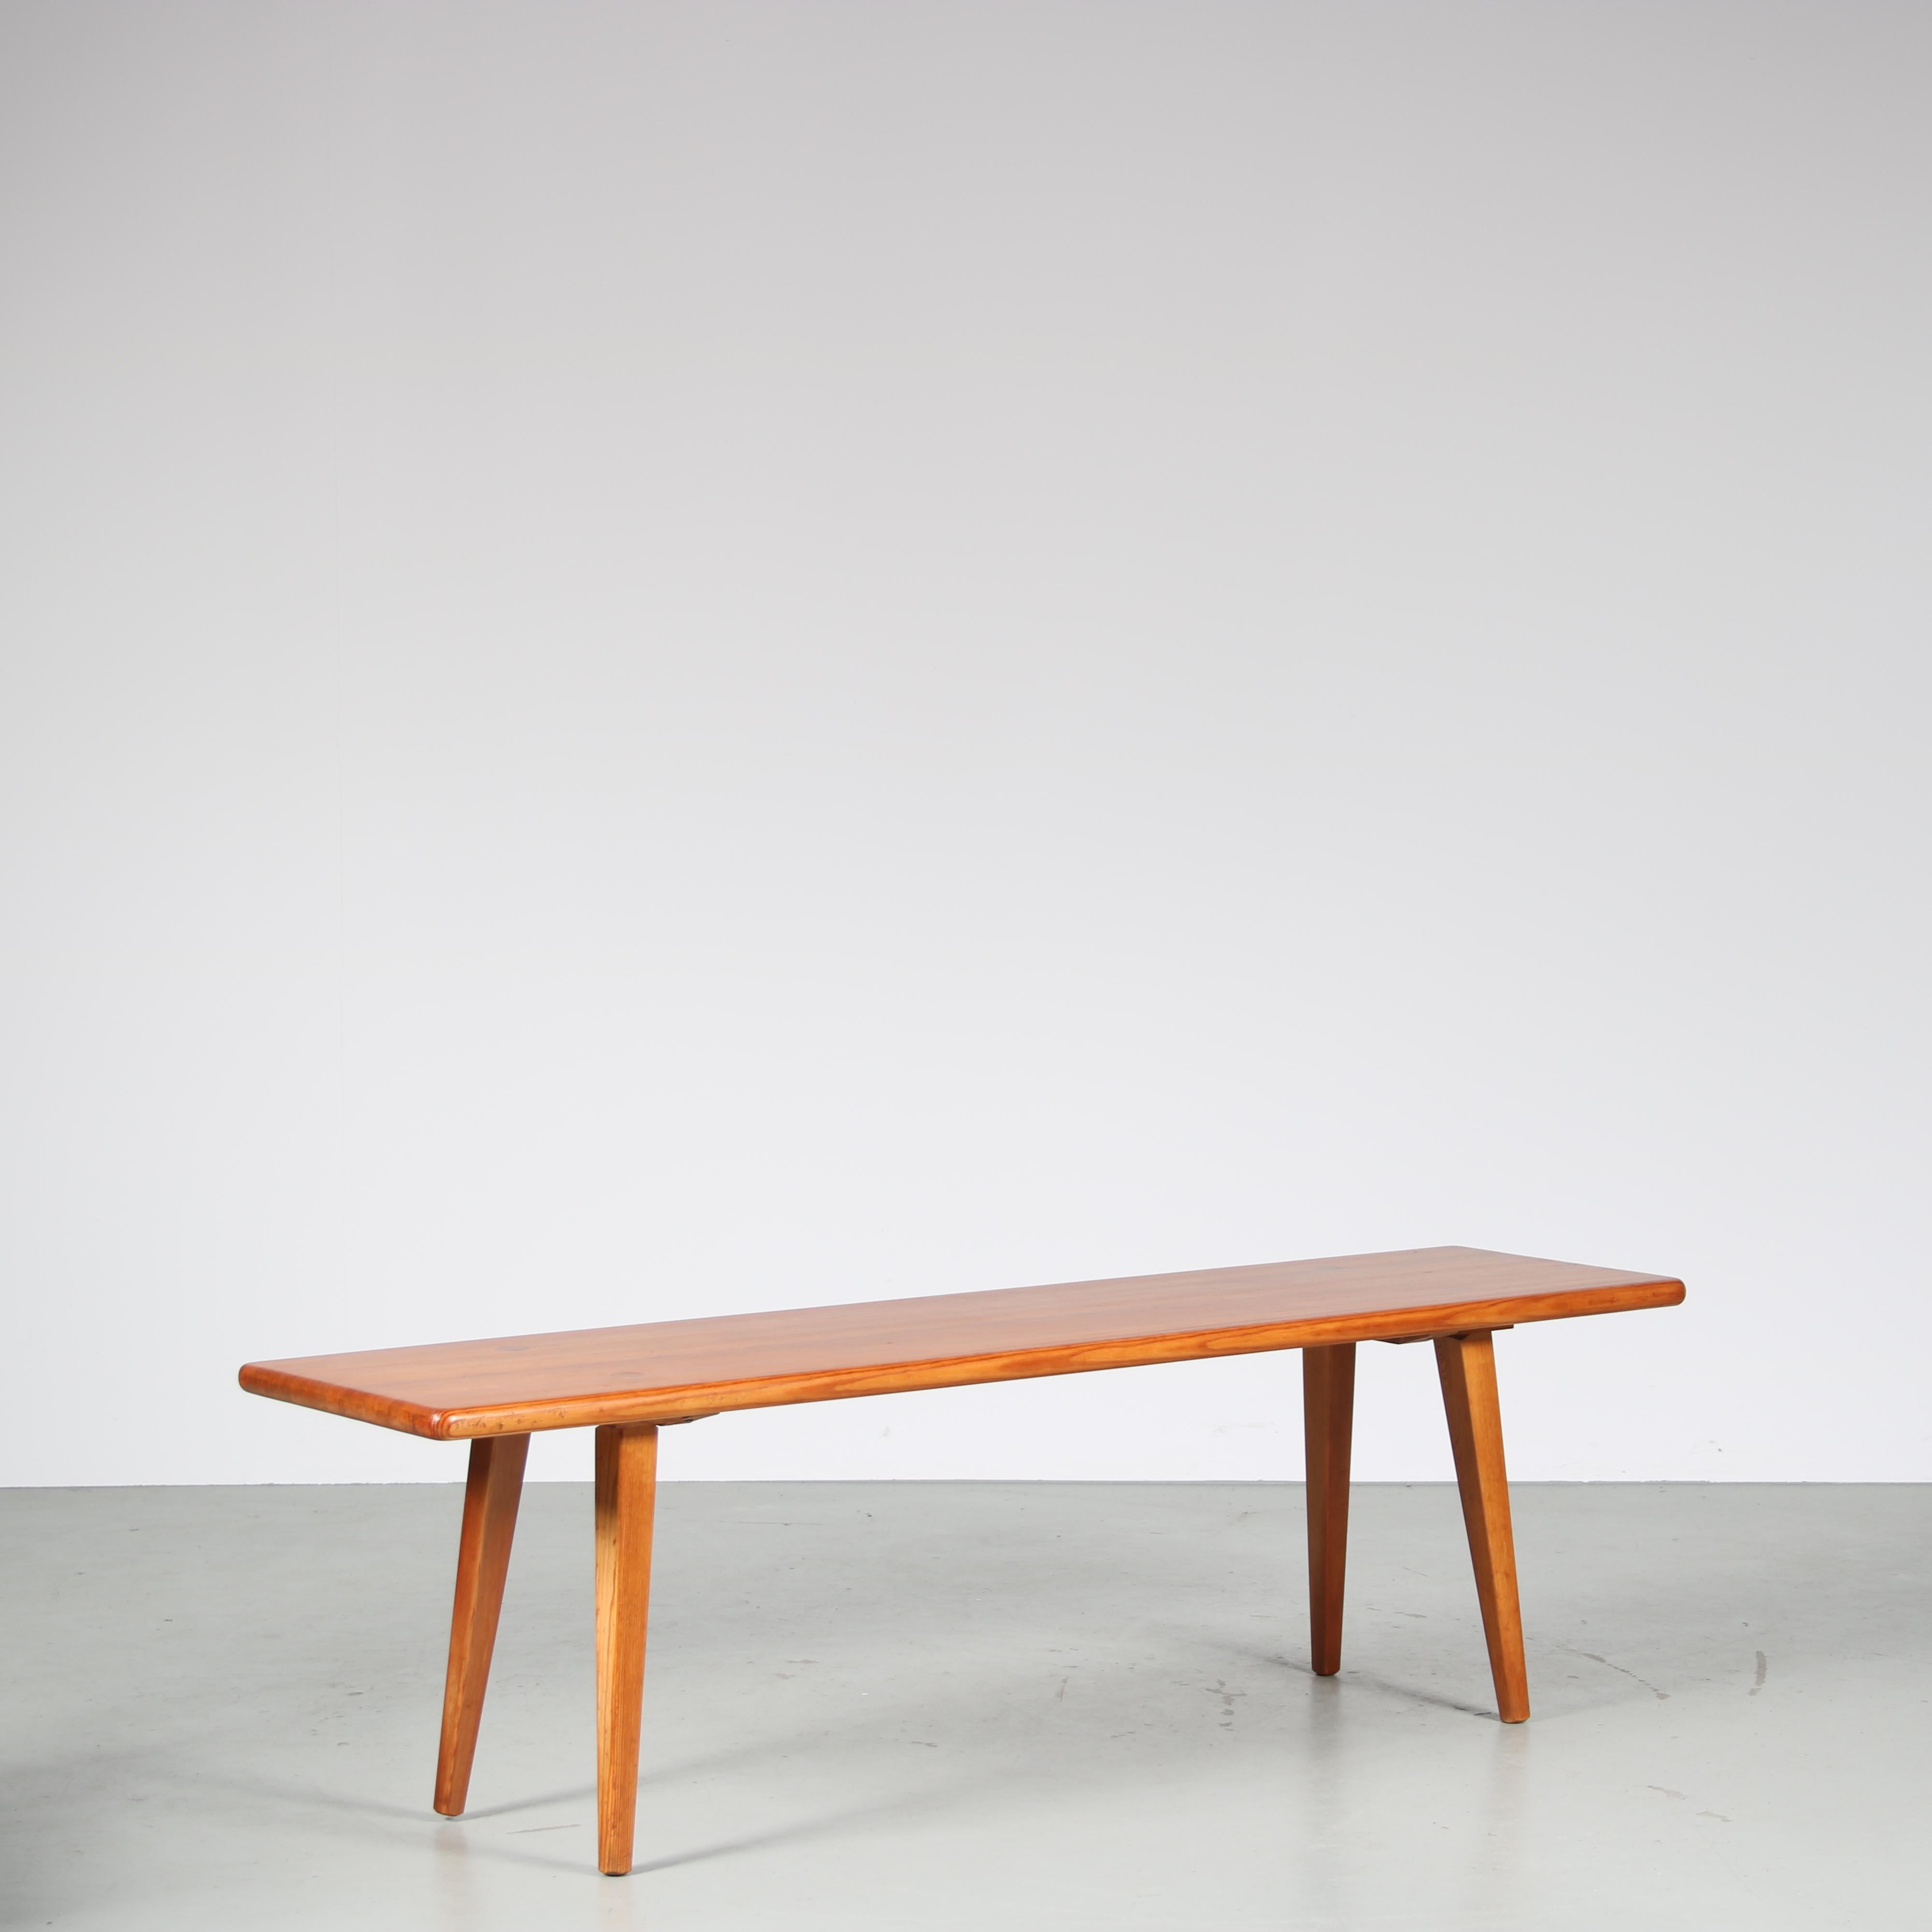 A wonderful pine wooden bench designed by Carl Malmsten, manufactured by Svensk Fur in Sweden around 1960. 

The bench is made of warm brown coloured pine wood. The narrow rectangular top / seat is held by four gently tapered legs. The top reveals